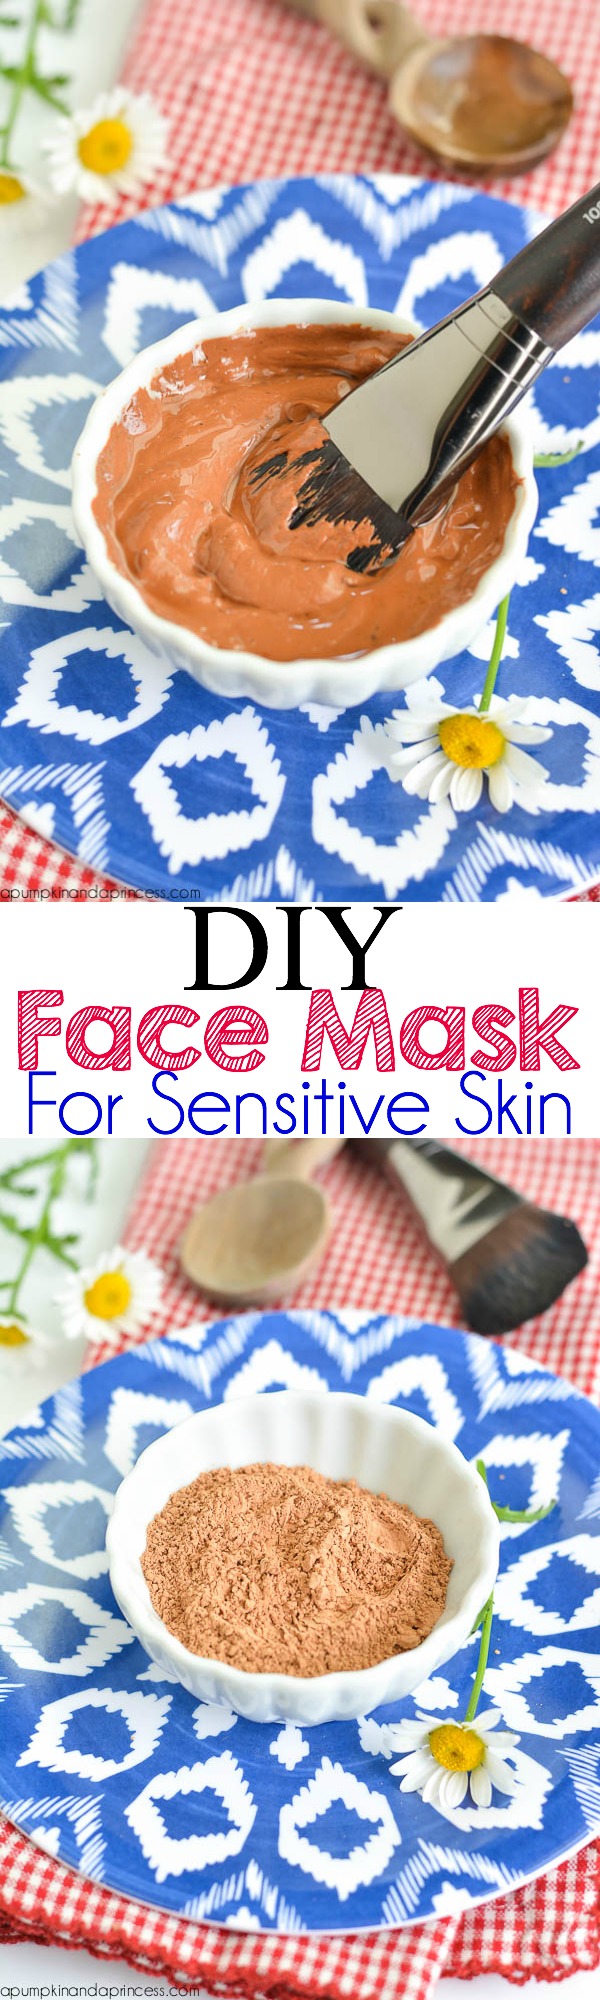 for   mask pamper skin homemade skin  mask your face for irritated with face skin DIY sensitive diy â€“ a